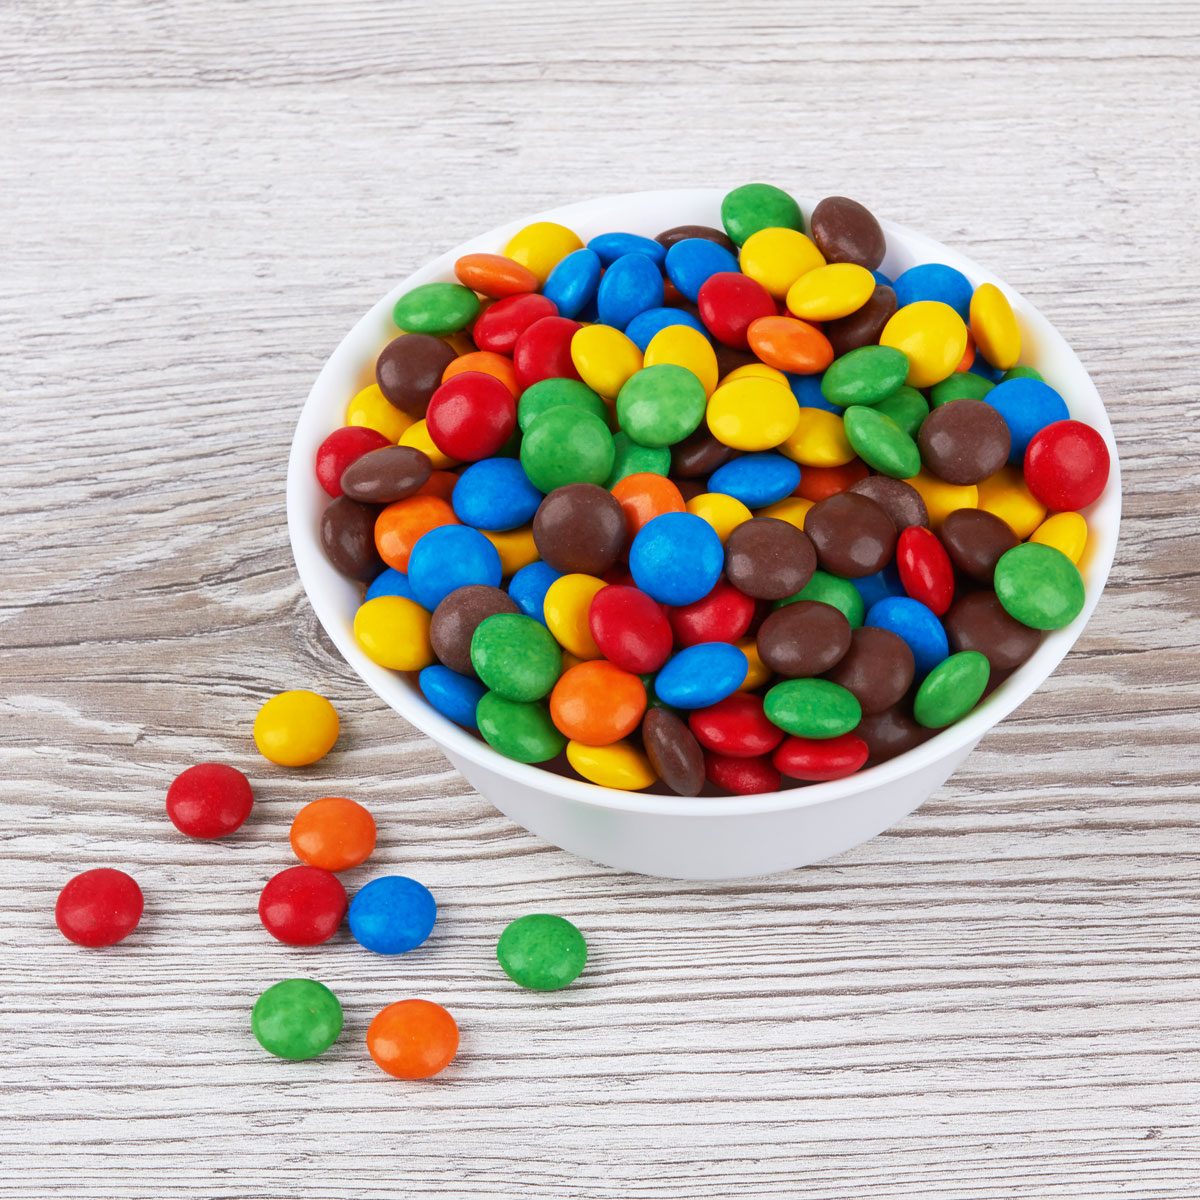 A Bowl Of Colorful Chocolate Candies On Wooden Background